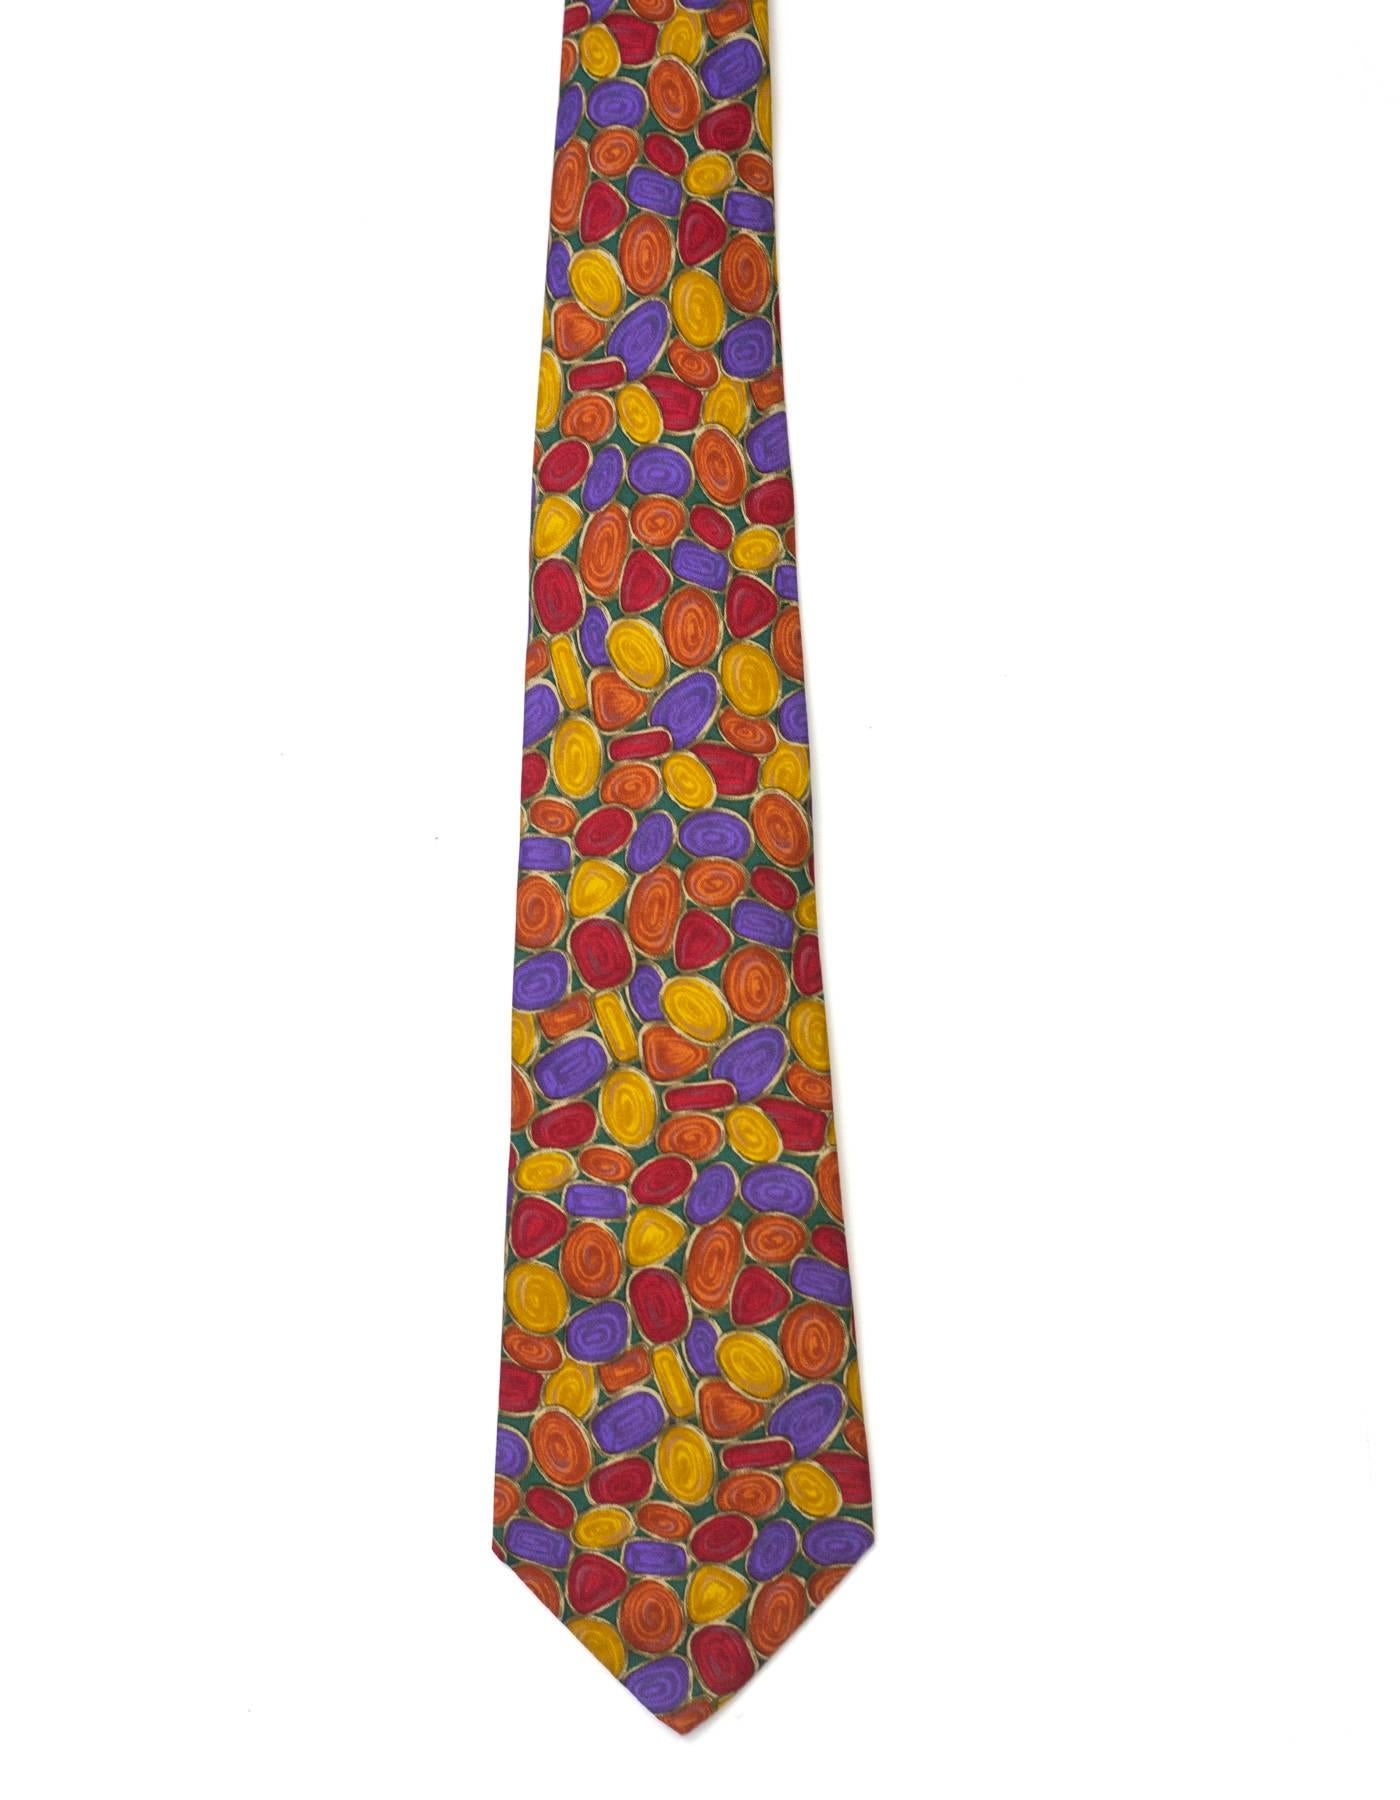 Chanel Multi-Color Jewel Print Silk Tie 

Made In: Italy
Color: Red, orange, yellow, purple, and green
Composition: 100% silk
Overall Condition: Excellent pre-owned condition
Measurements: 
Length: 57"
Width: 1.75"-3.65"